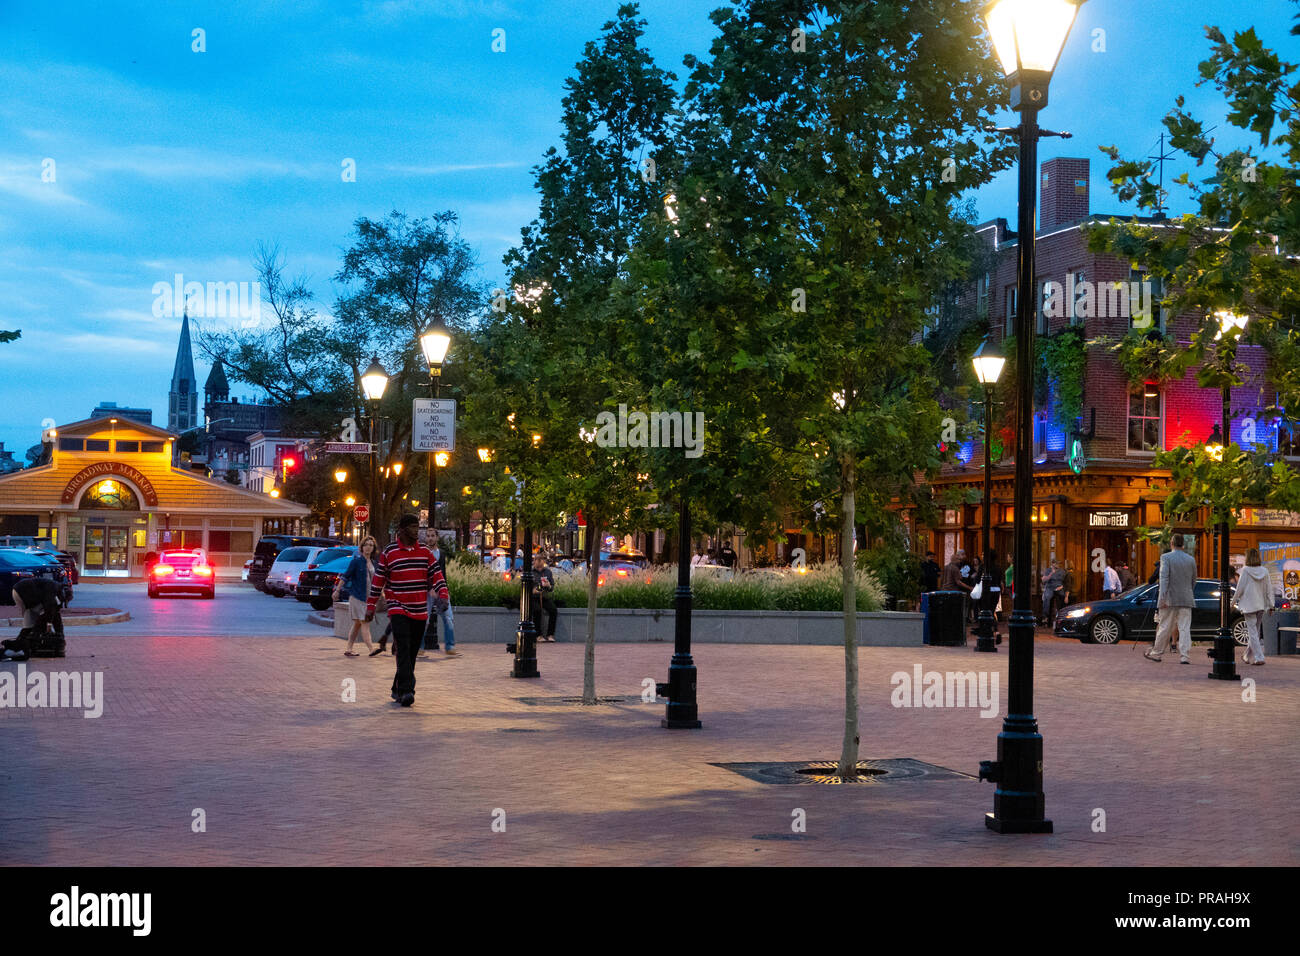 USA Maryland MD Baltimore Fells Point Broadway Square bei Nacht am Abend Stockfoto